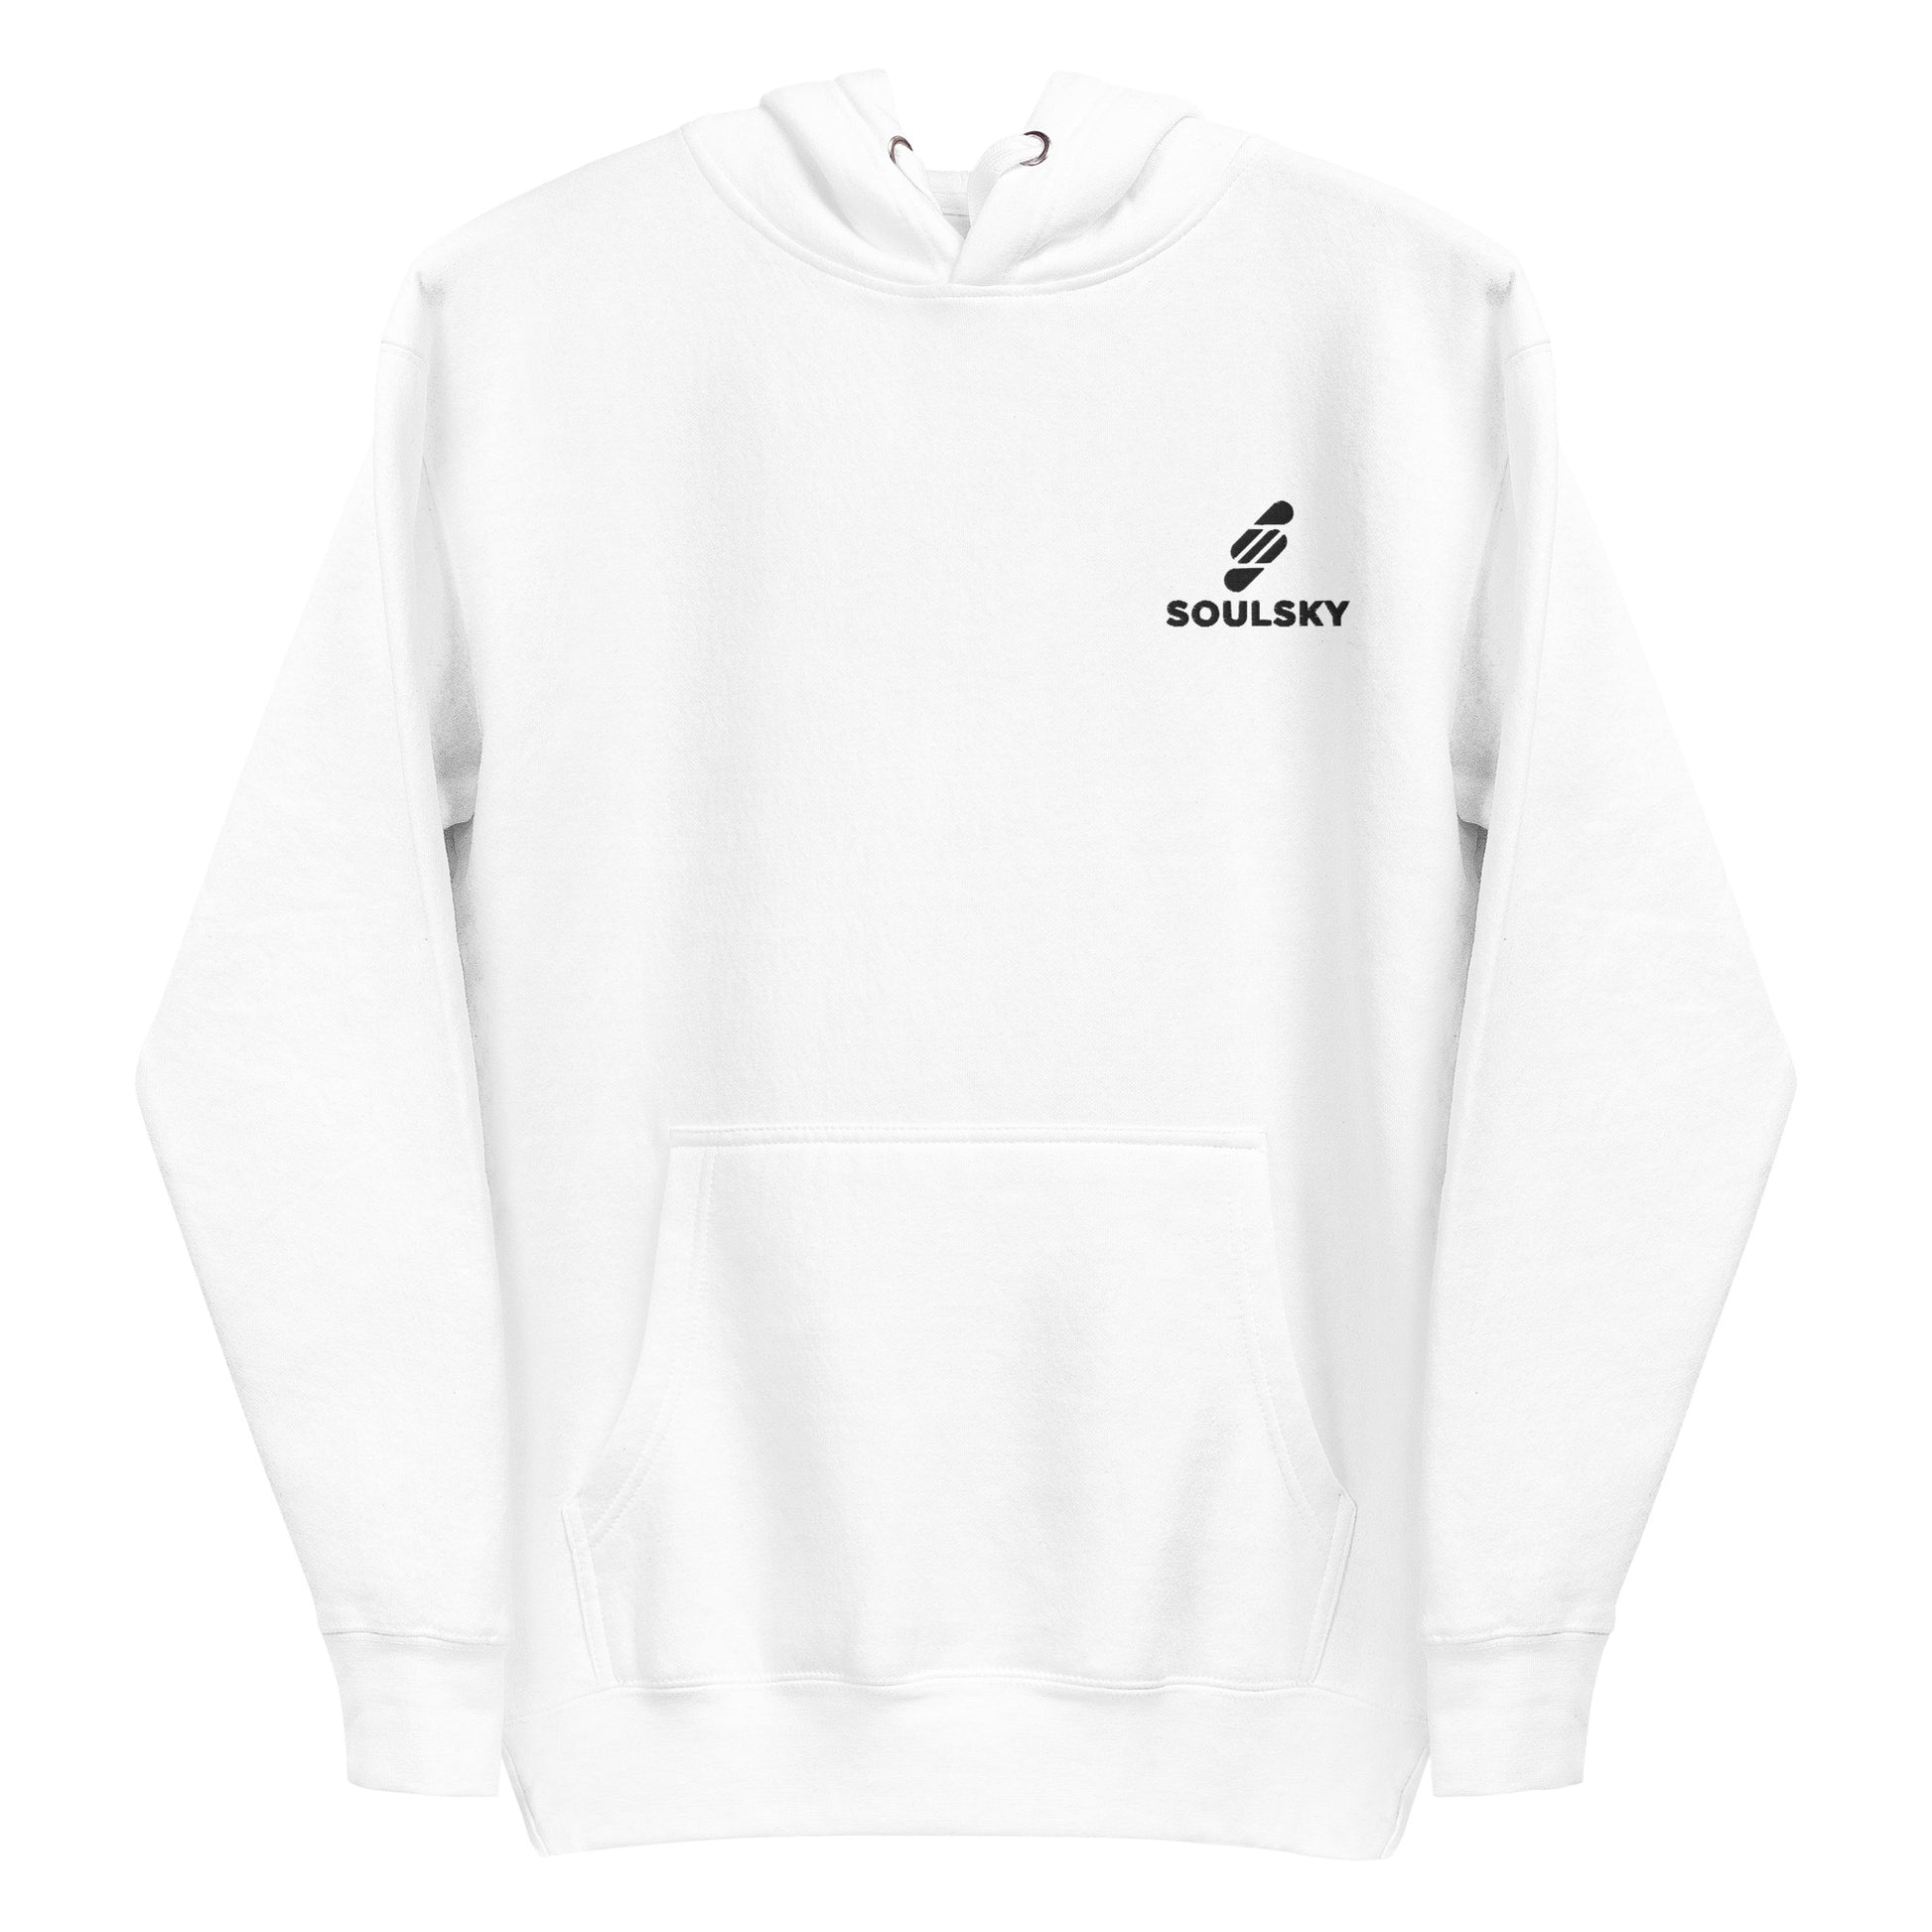 White hoodie with white embroidered logo on the upper left side that says 'SOULSKY'. Pic 2.